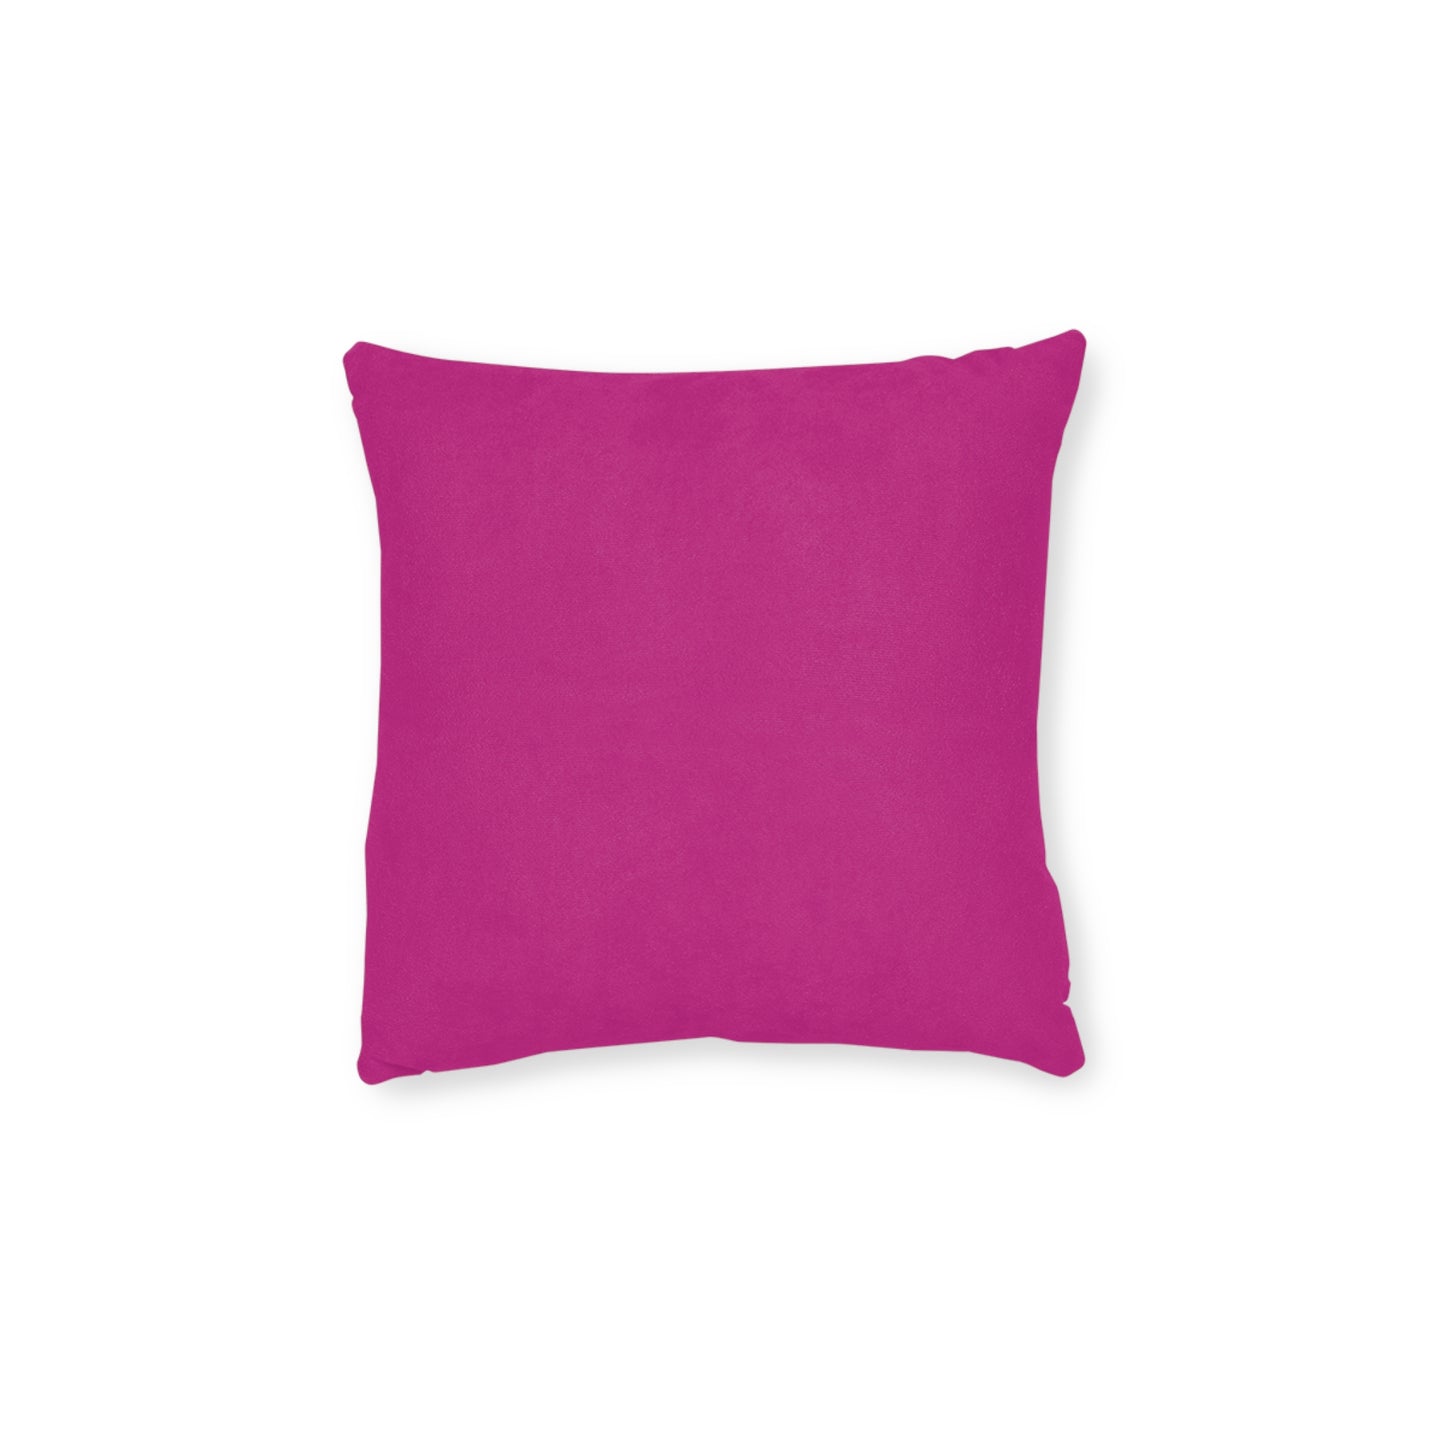 Survivors are miracles occurring every moment - Decorative Square Pillow